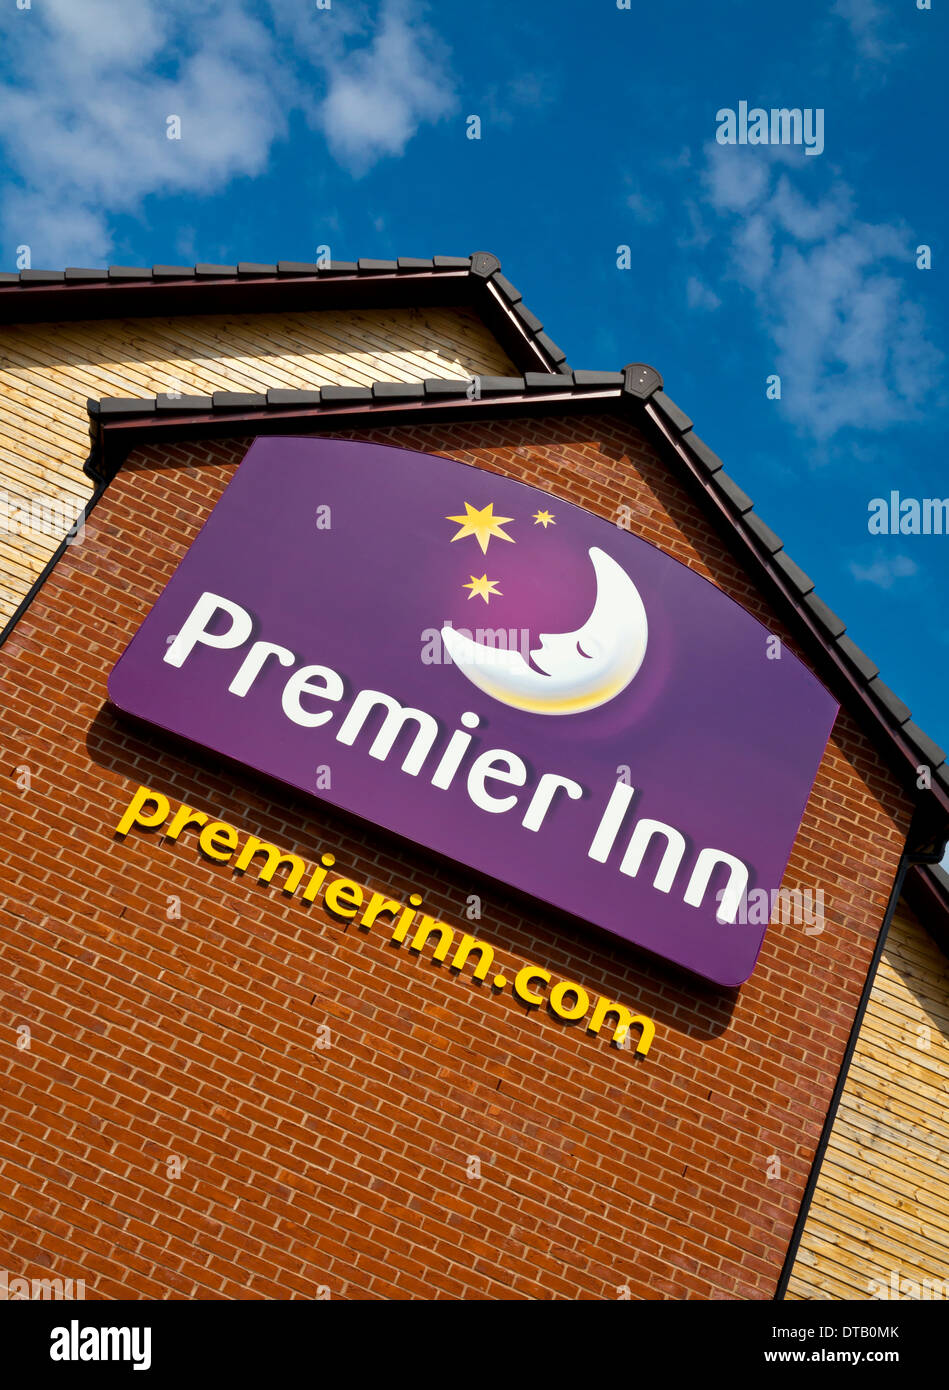 Premier Inn in Rugeley Staffordshire England UK part of a chain of British budget hotels owned by Whitbread Stock Photo